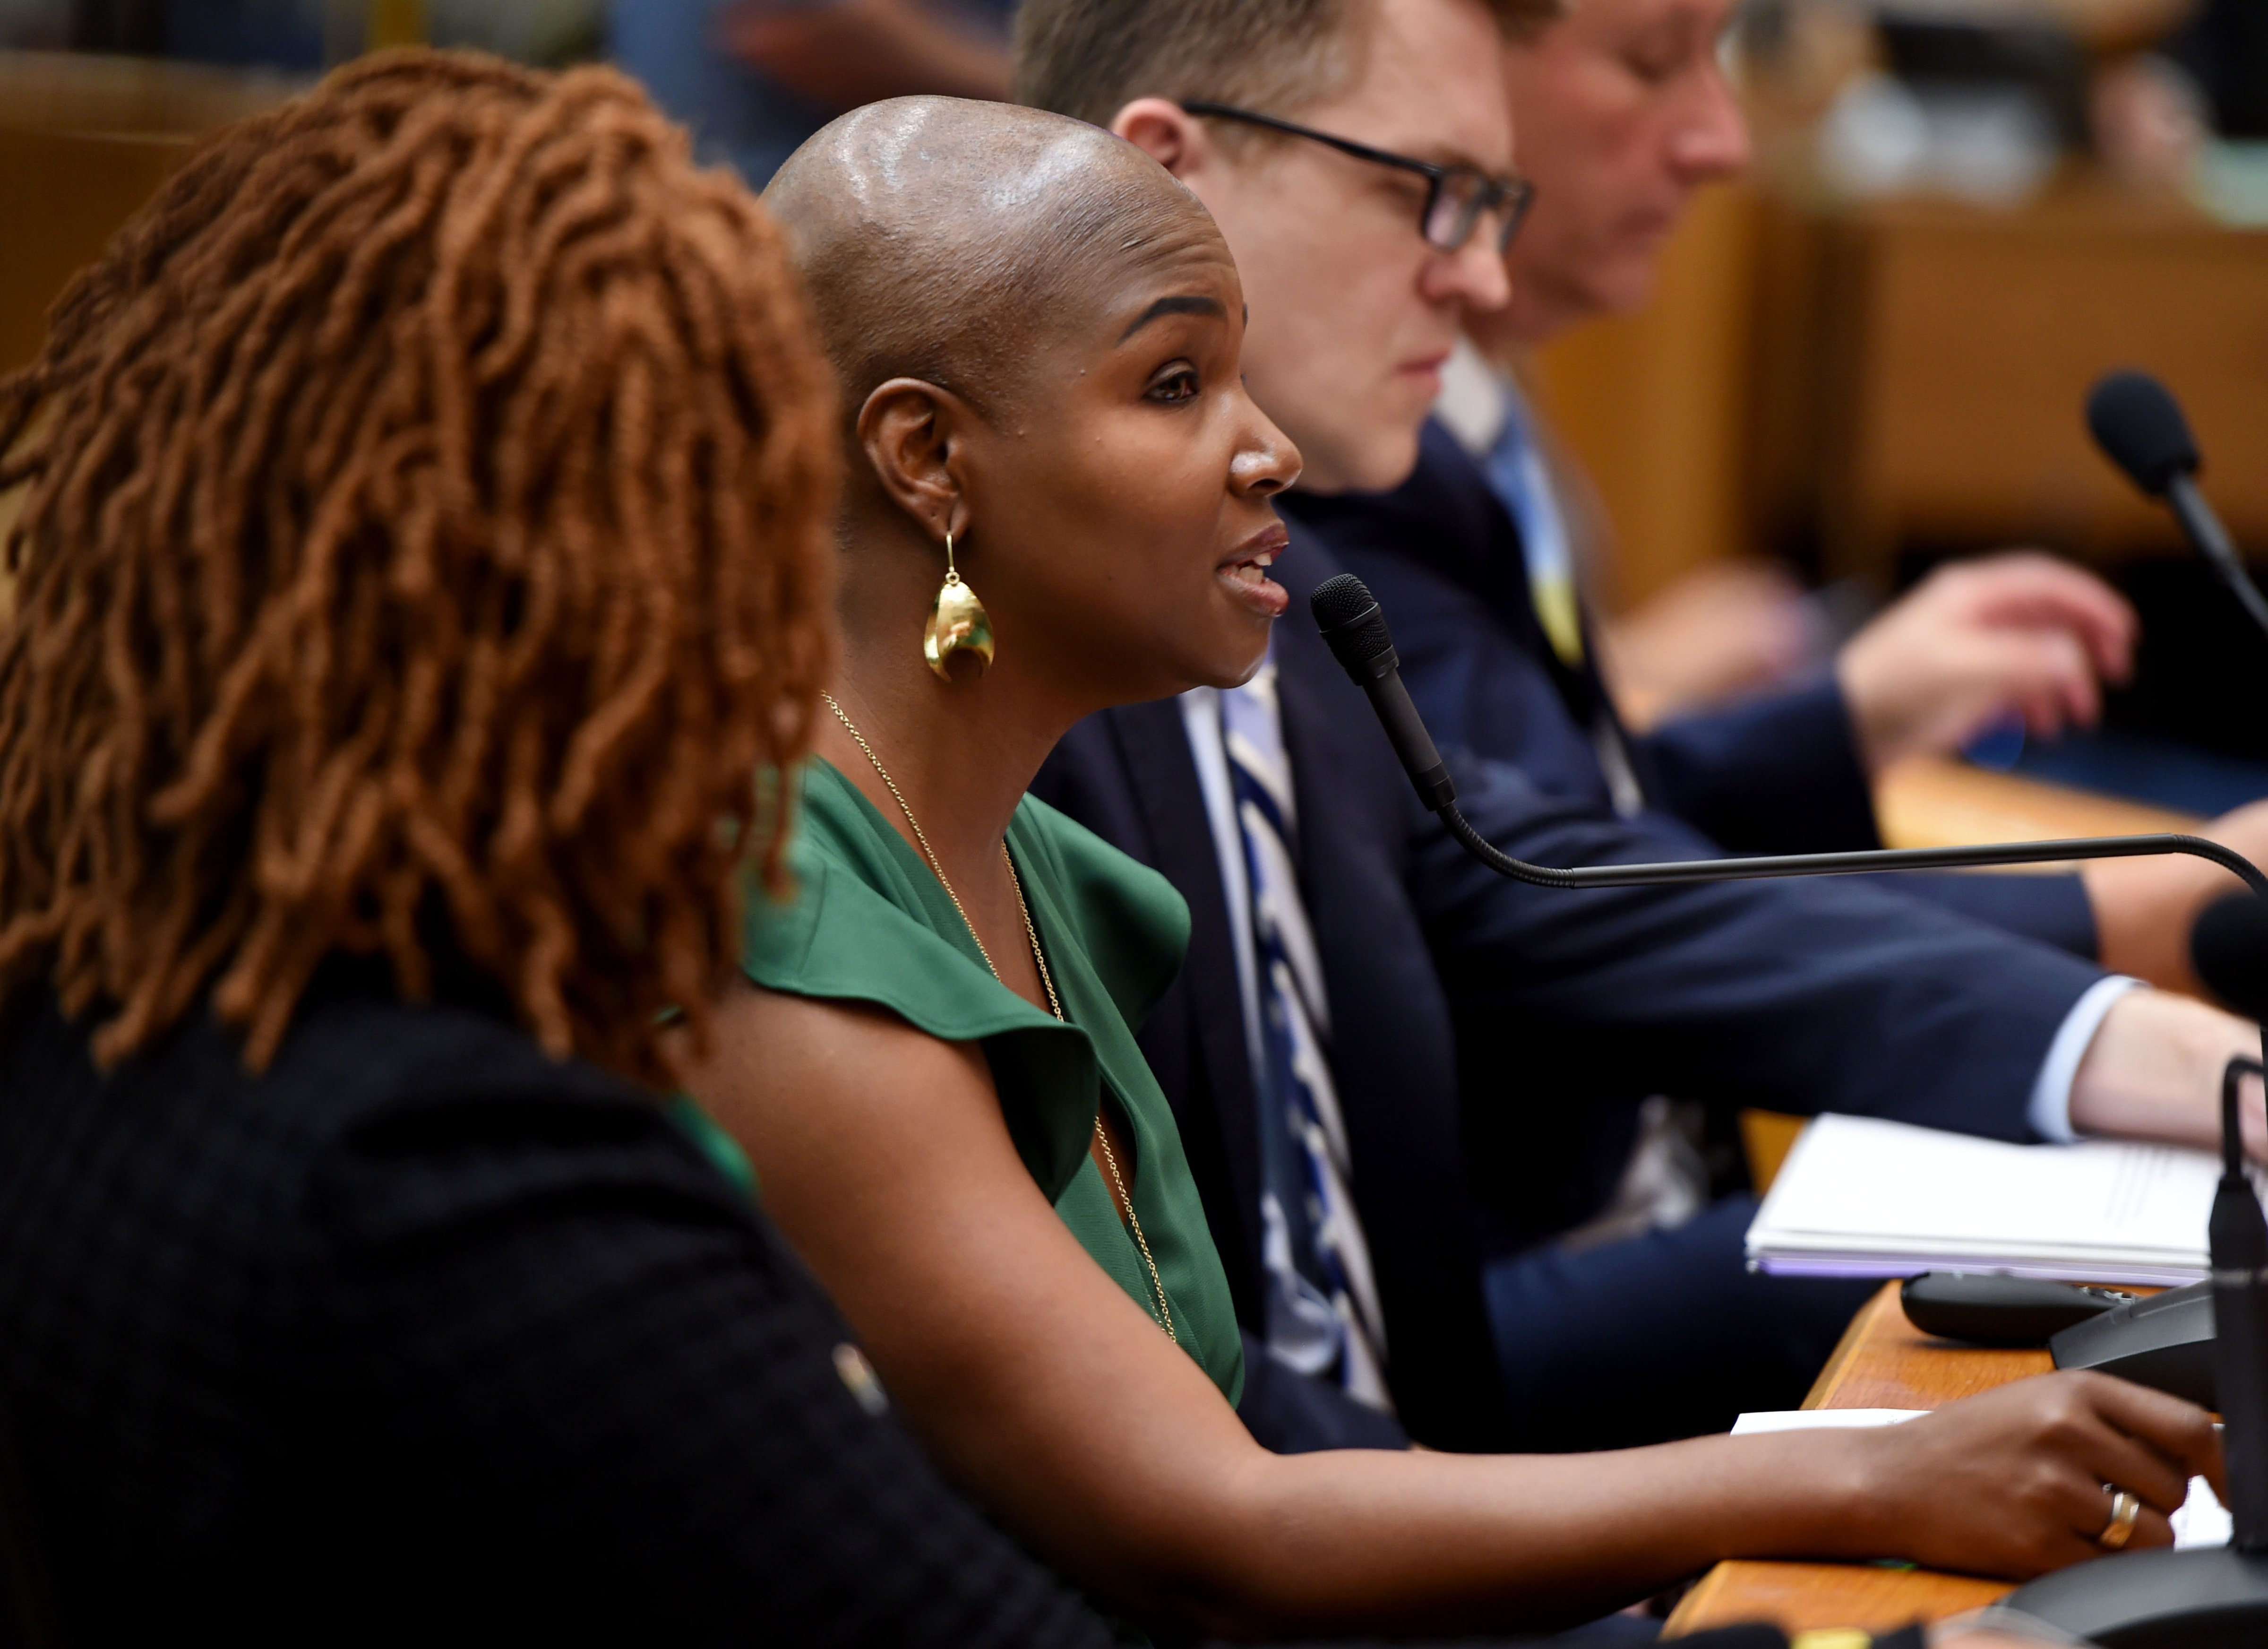 Monique King-Viehland, executive director of the Los Angeles County Development Authority, speaks following the presentation of 2019 homeless count at the Board of Supervisors Meeting in Los Angeles on Tuesday, June 4, 2019. (MediaNews Group/Long Beach Press&mdash;MediaNews Group via Getty Images)